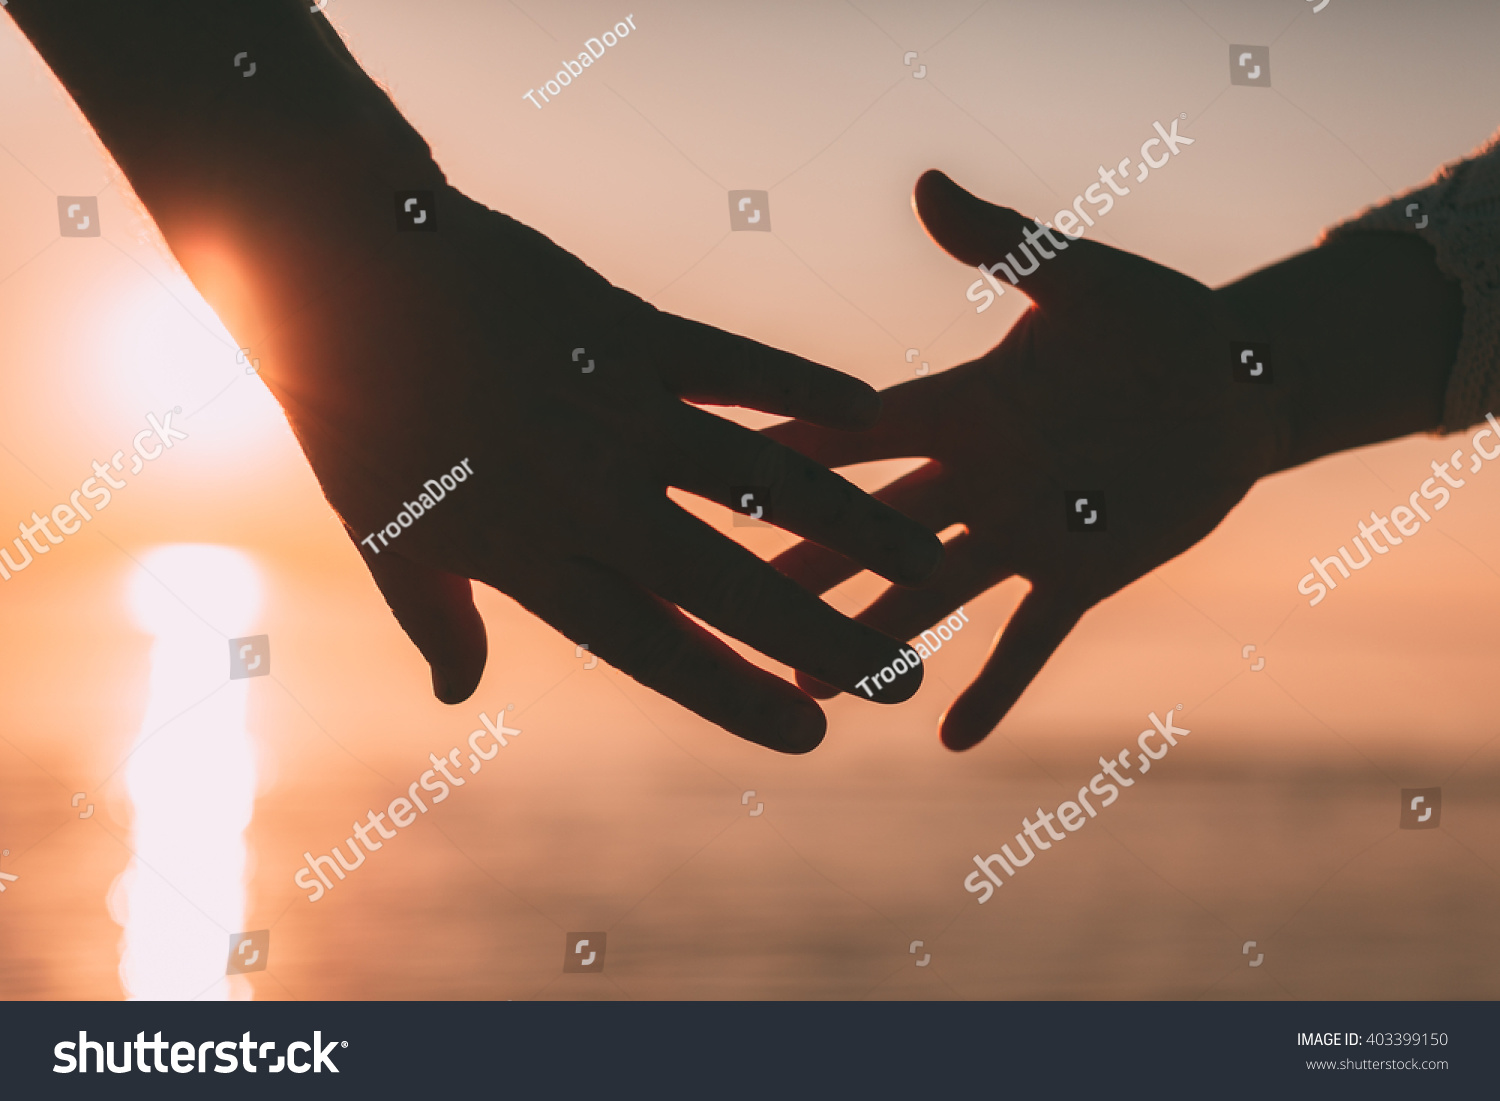 Couple hands reach silhouette on a sky and sea background. Evening photo. #403399150